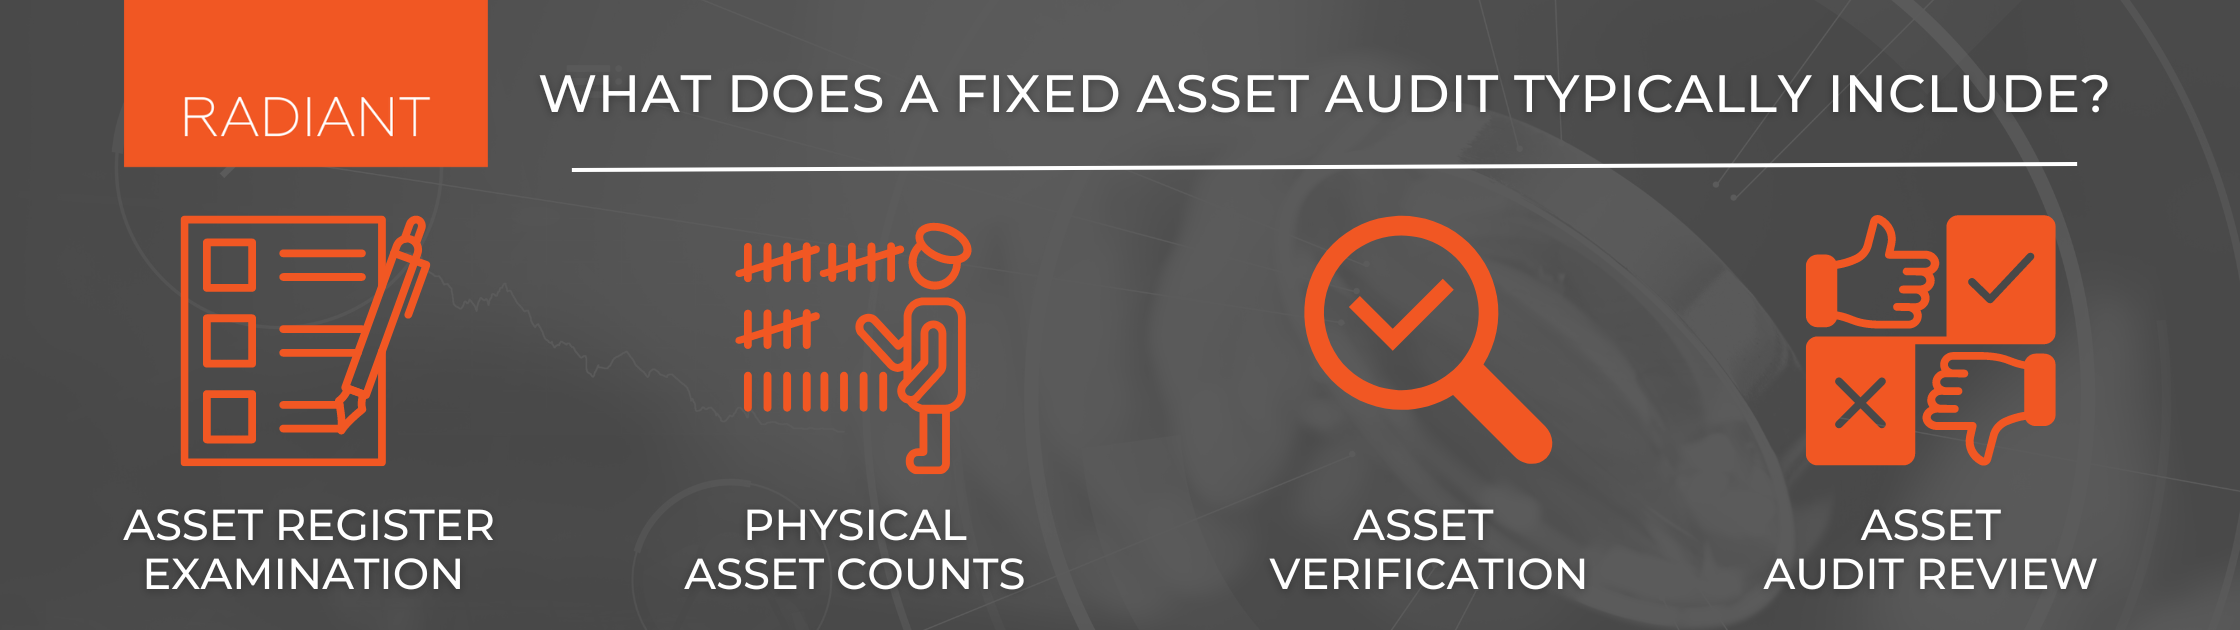 Audit Procedures For Fixed Assets - Fixed Asset Audit Program - Audit Asset Management - Asset Management Audit Checklist - Software Asset Management Audit - Asset Audit - Fixed Asset Audit - Asset Management Audit - Asset Management Audit Program - Fixed Assets Audit - Audit Of Fixed Assets - Software Asset Management Audit Program - What Type Of Audit Evidence For Fixed Assets